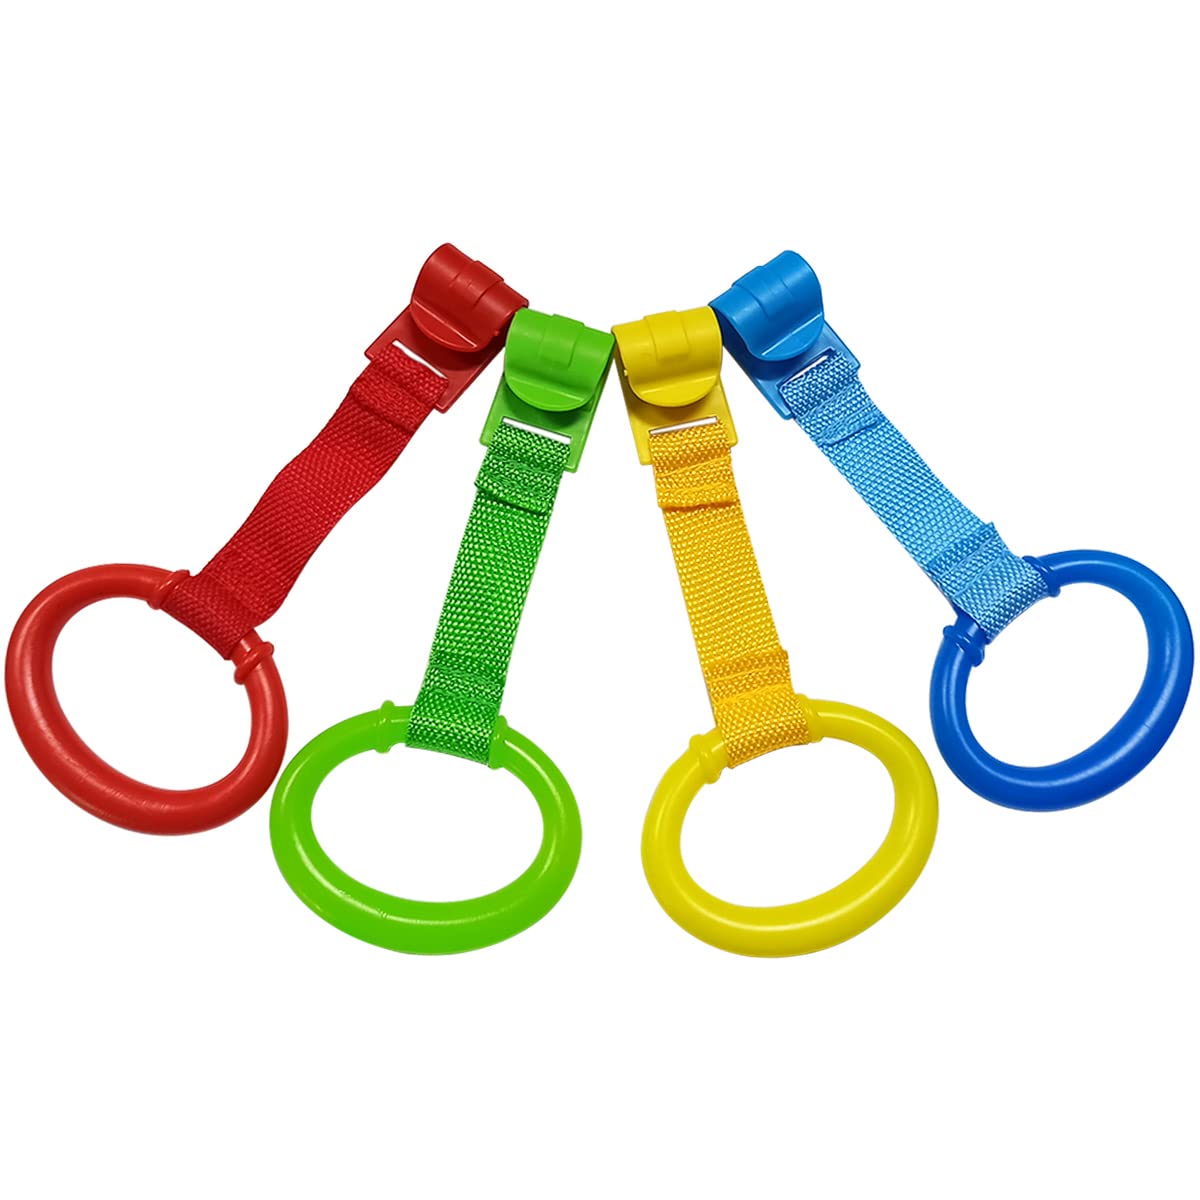 4 PCS 4 Colors Plastic Baby Crib Pull Rings Kids Walking Exercises Assistant Stand Up Rings Baby Cot Hanging Rings for Infant Baby Toddler Practice Tool